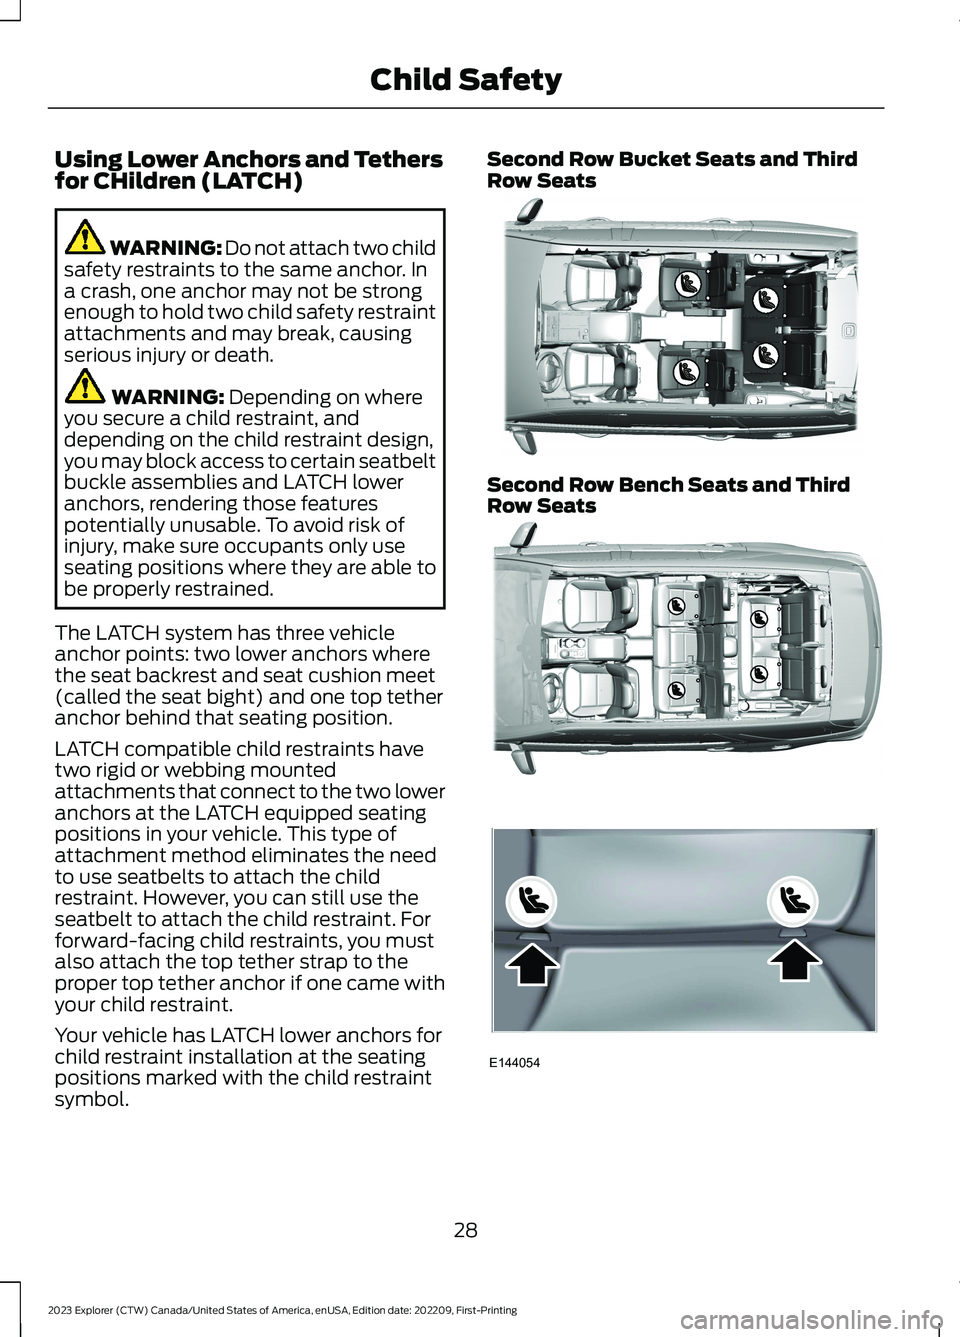 FORD EXPLORER 2023  Owners Manual Using Lower Anchors and Tethersfor CHildren (LATCH)
WARNING: Do not attach two childsafety restraints to the same anchor. Ina crash, one anchor may not be strongenough to hold two child safety restrai